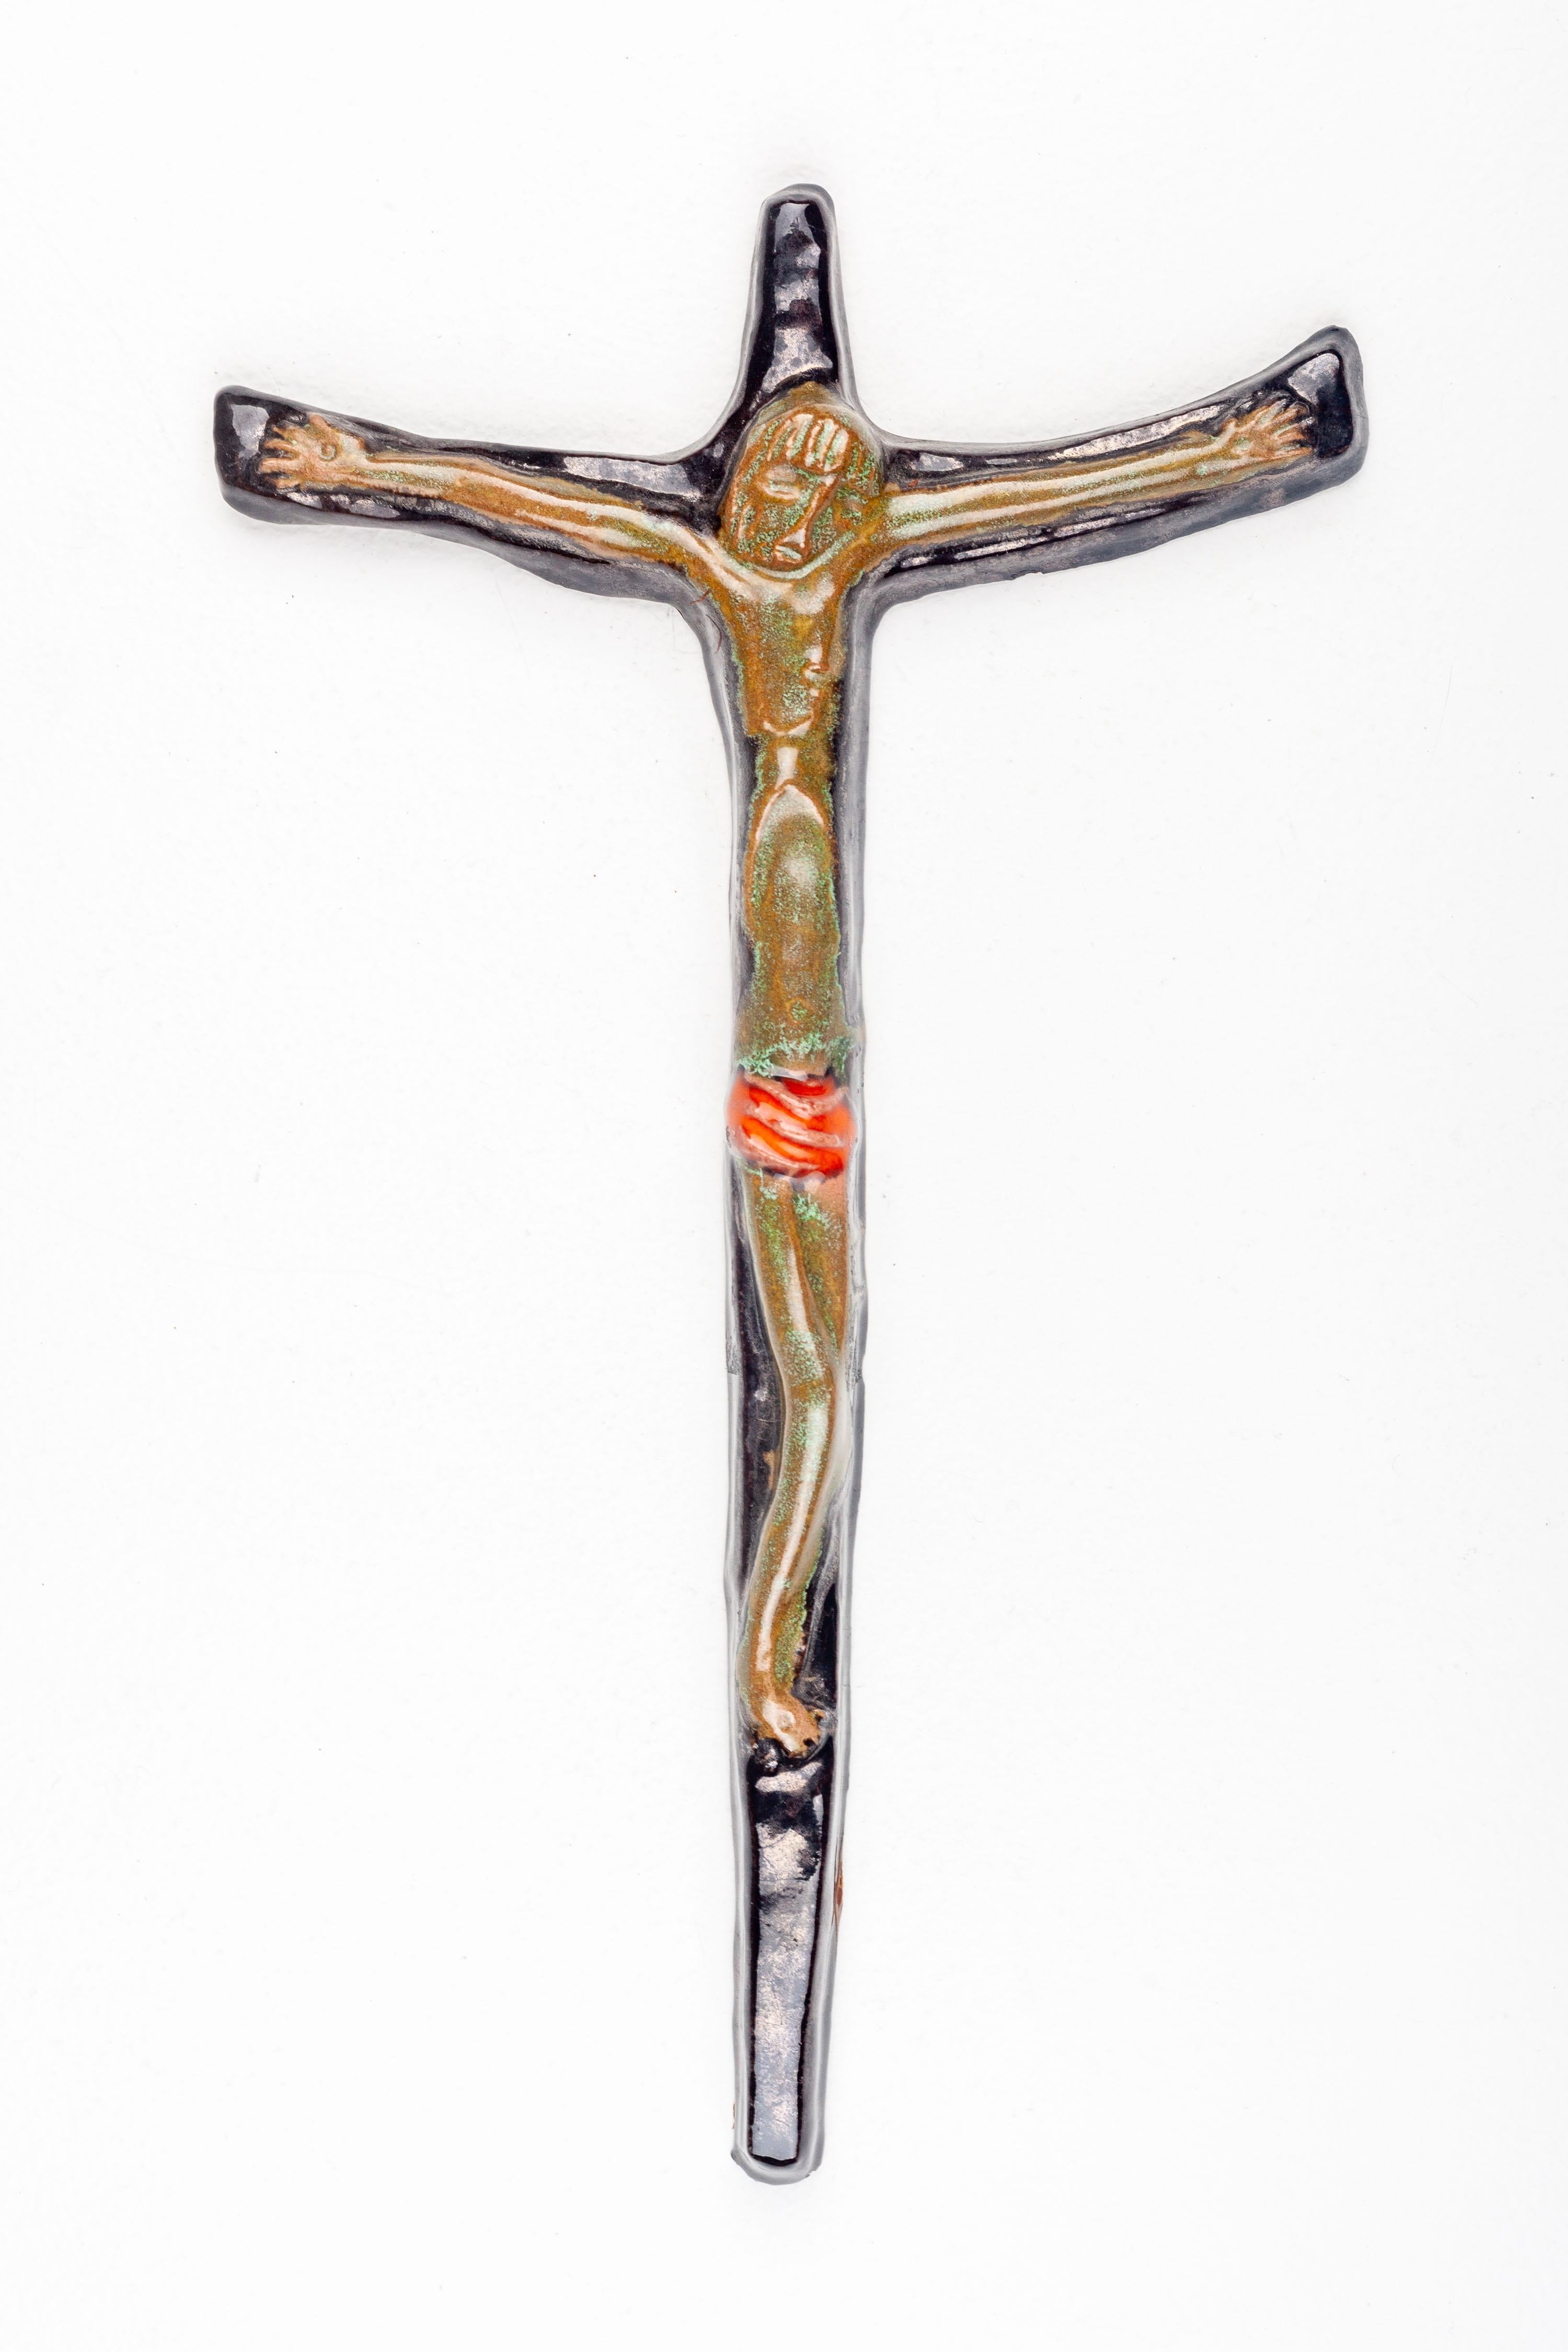 European Mid-Century Modern Studio Crafted Ceramic Wall Crucifix For Sale